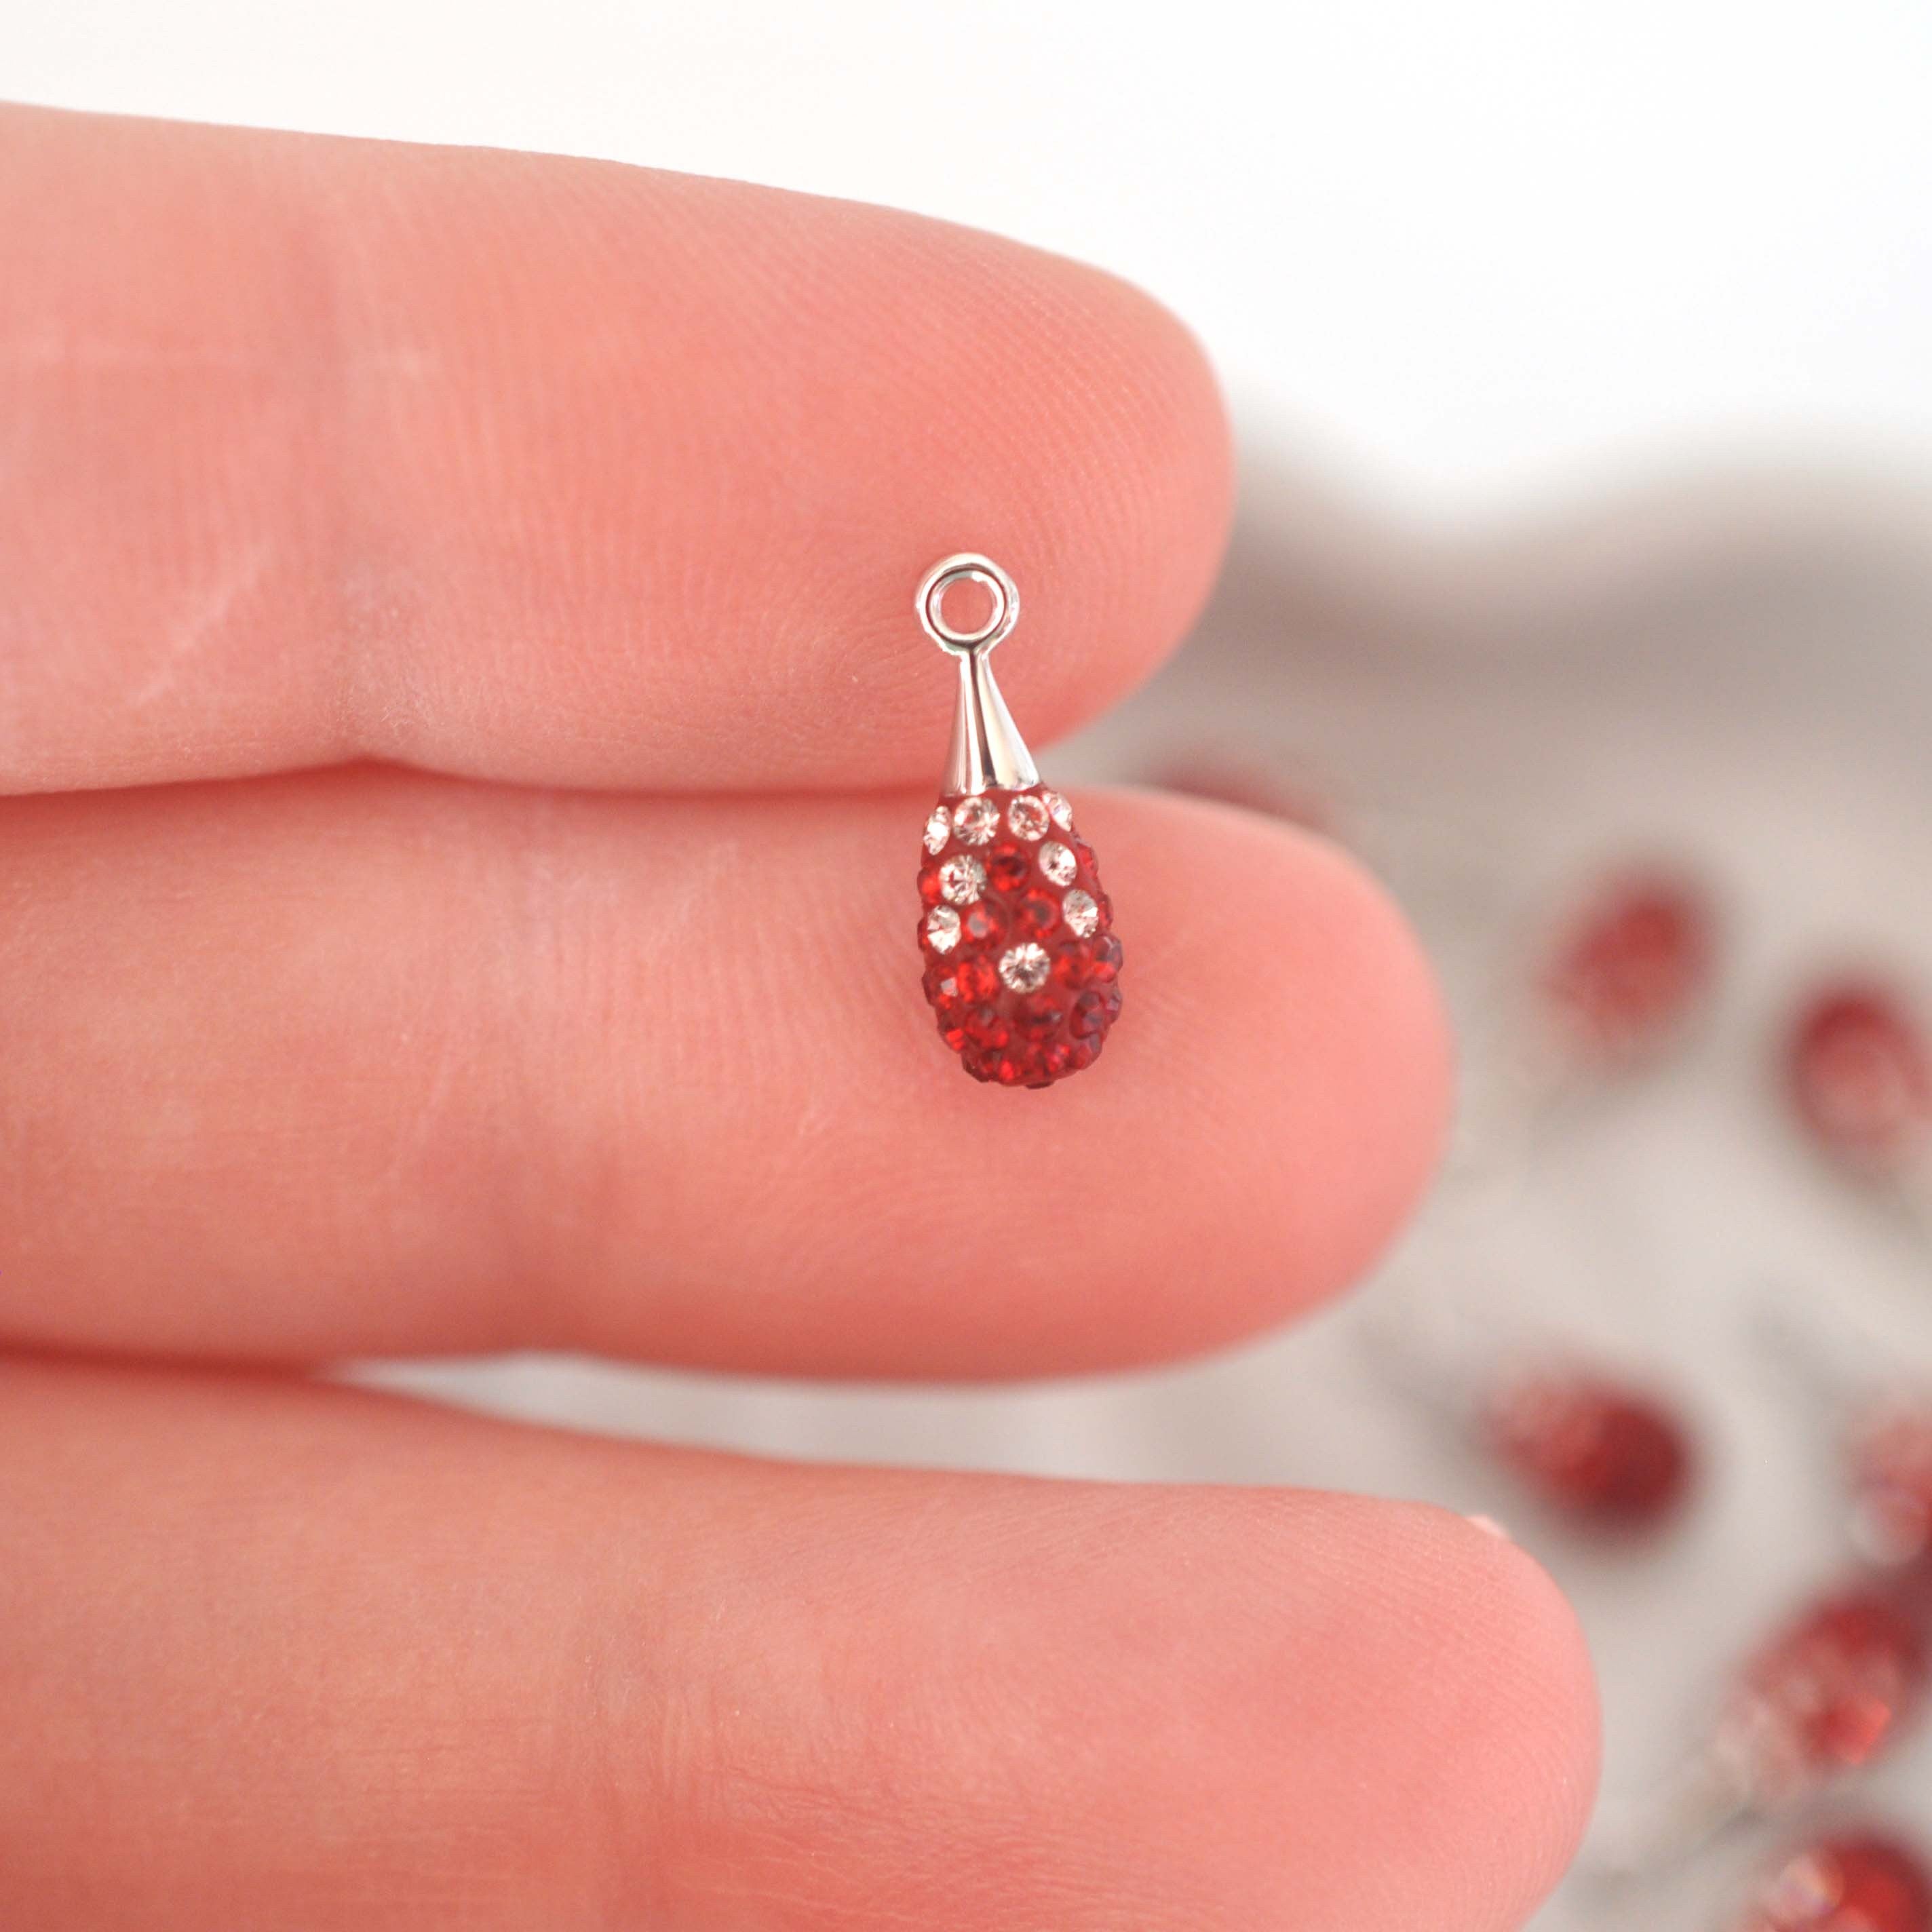 Ruby Red Pave Drops Pendant 14mm - 1 Pendant